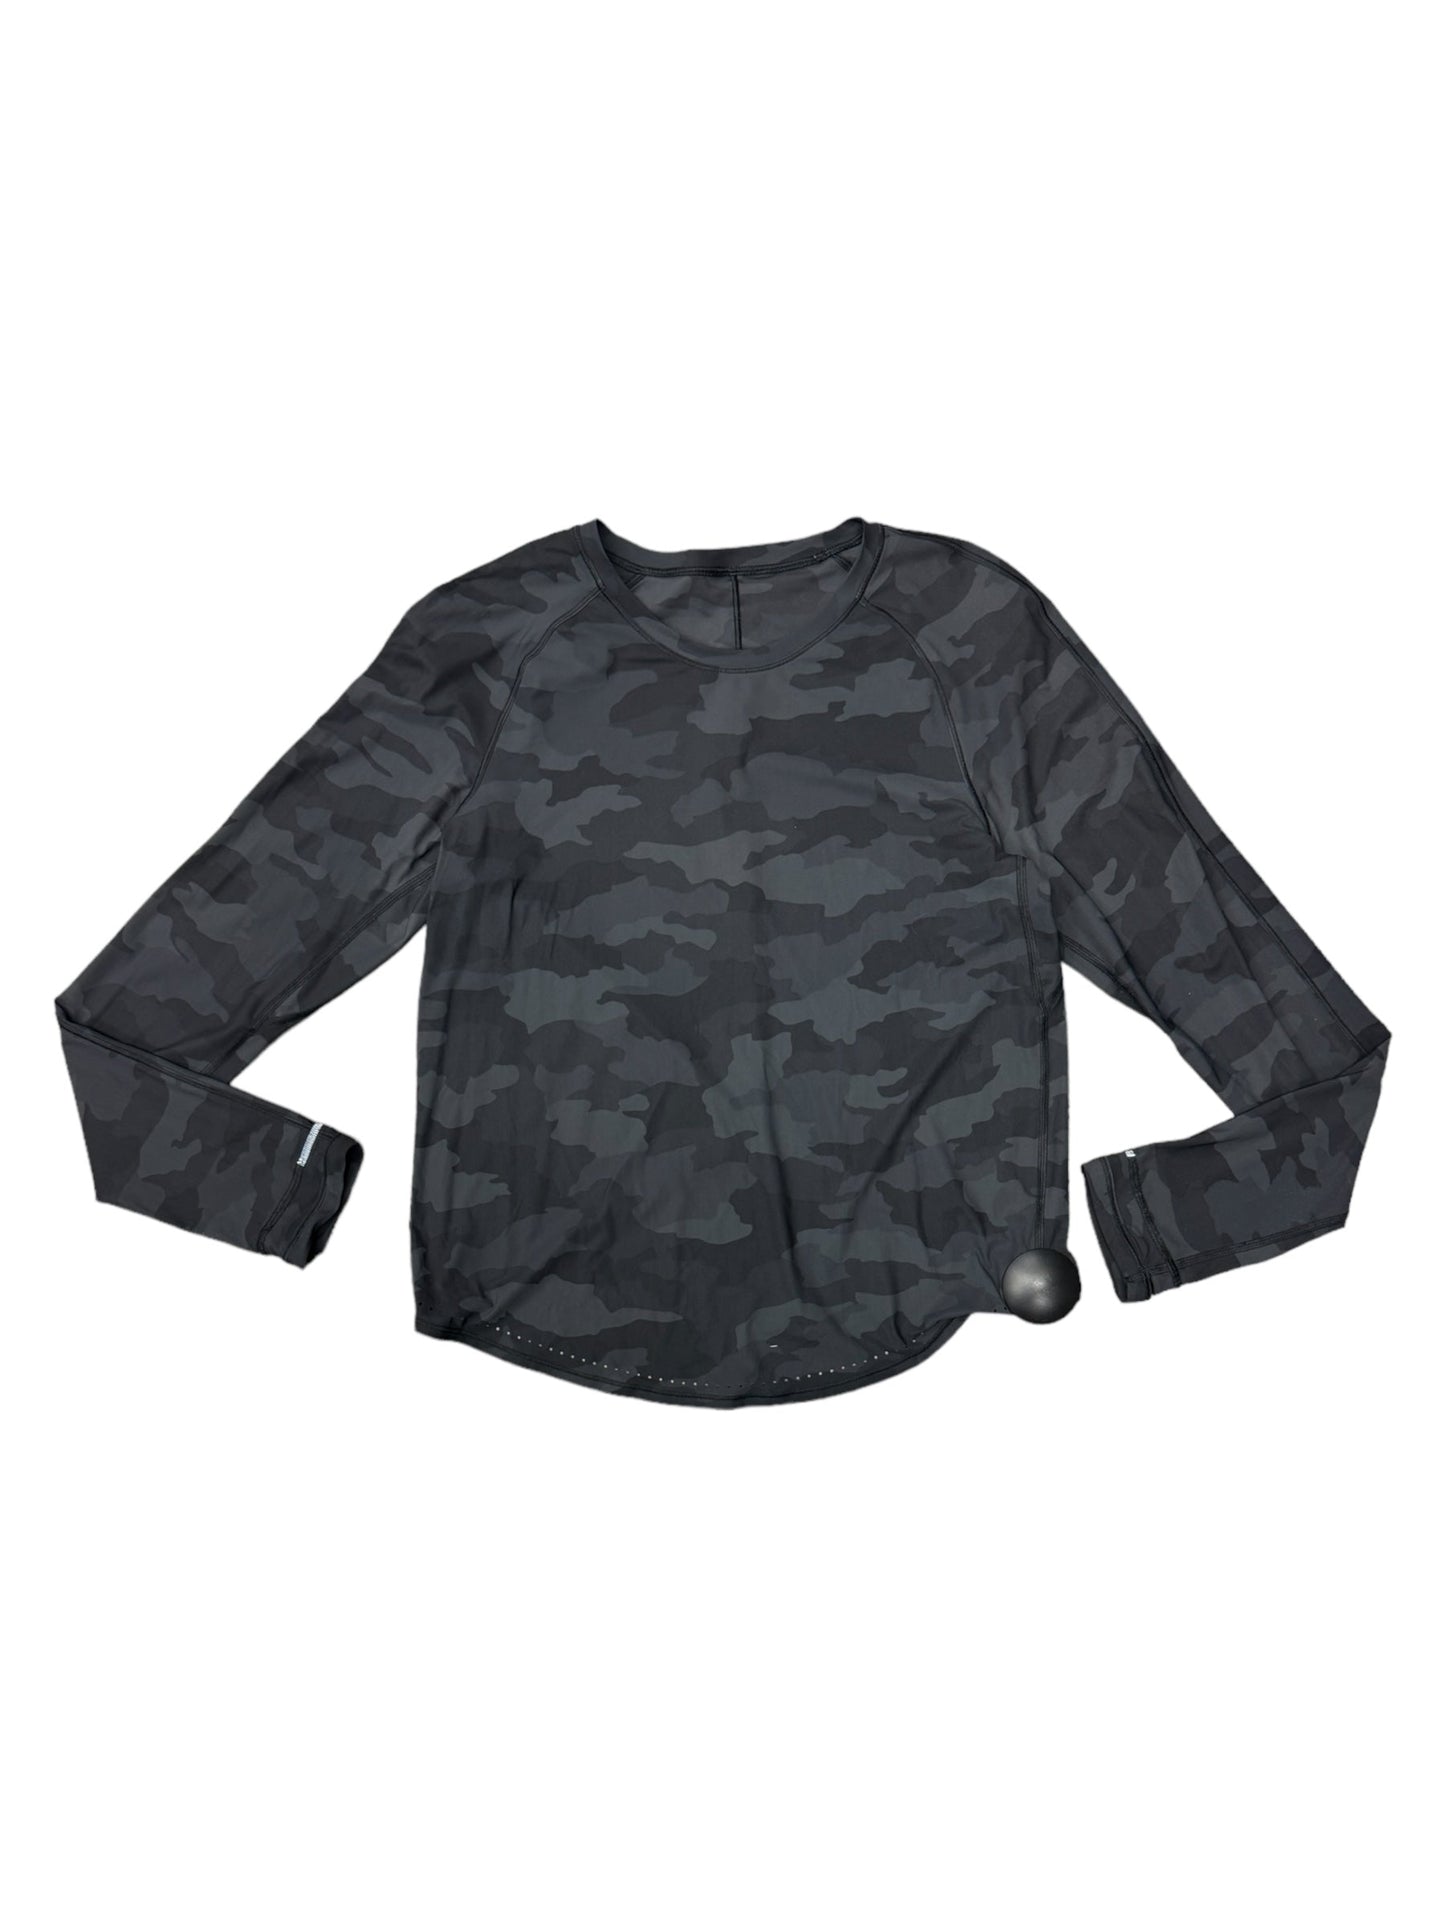 Camouflage Print Athletic Top Long Sleeve Collar Lululemon, Size S